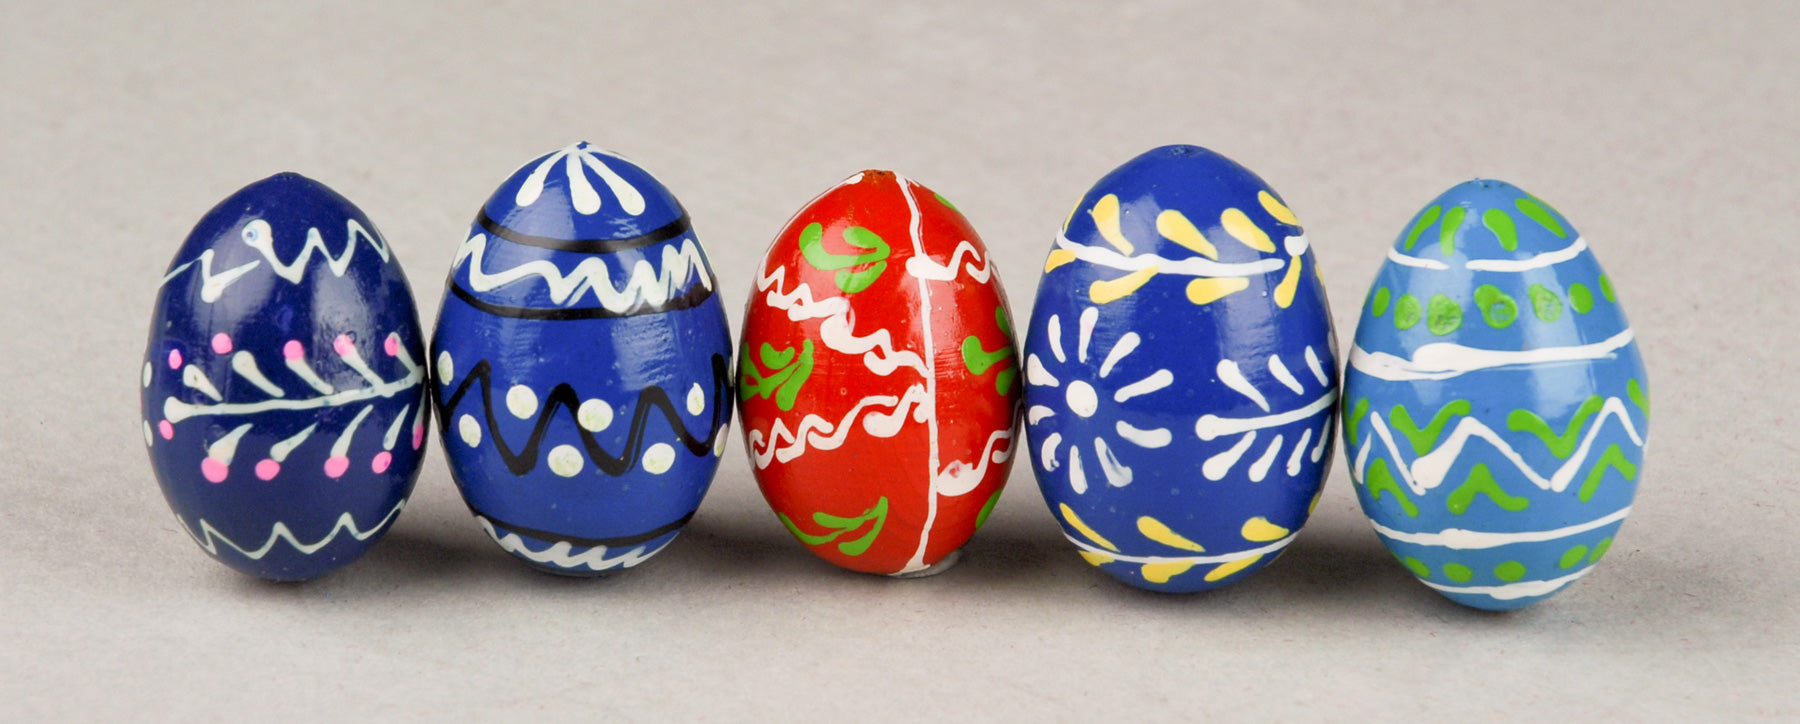 Hand Painted Small Wooden Eggs, Set of 3 - 1.25 inches Tall